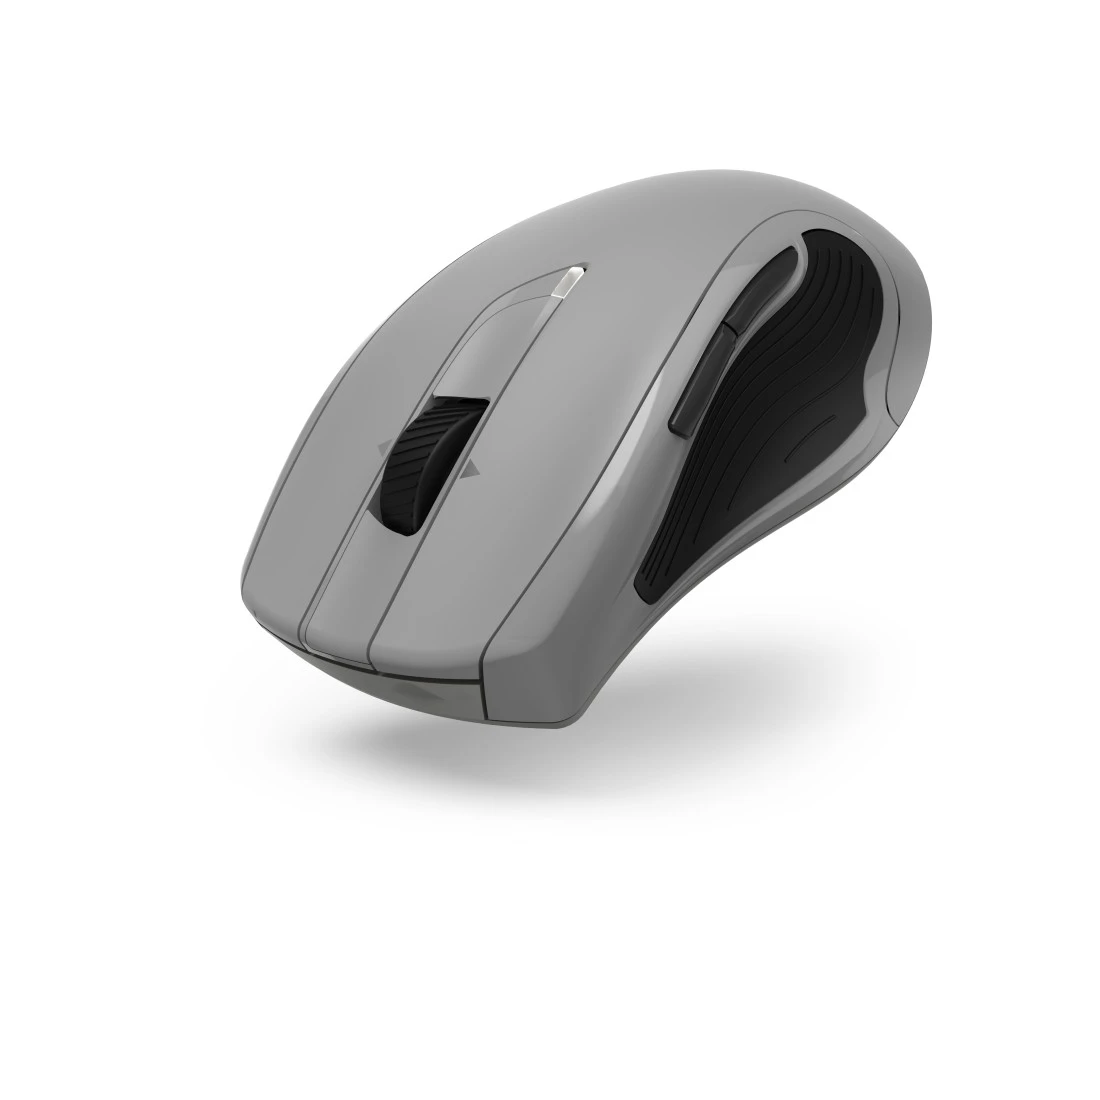 You Recently Viewed Hama 00173018 MW-900 V2 7-Button Laser Wireless Mouse, light grey Image